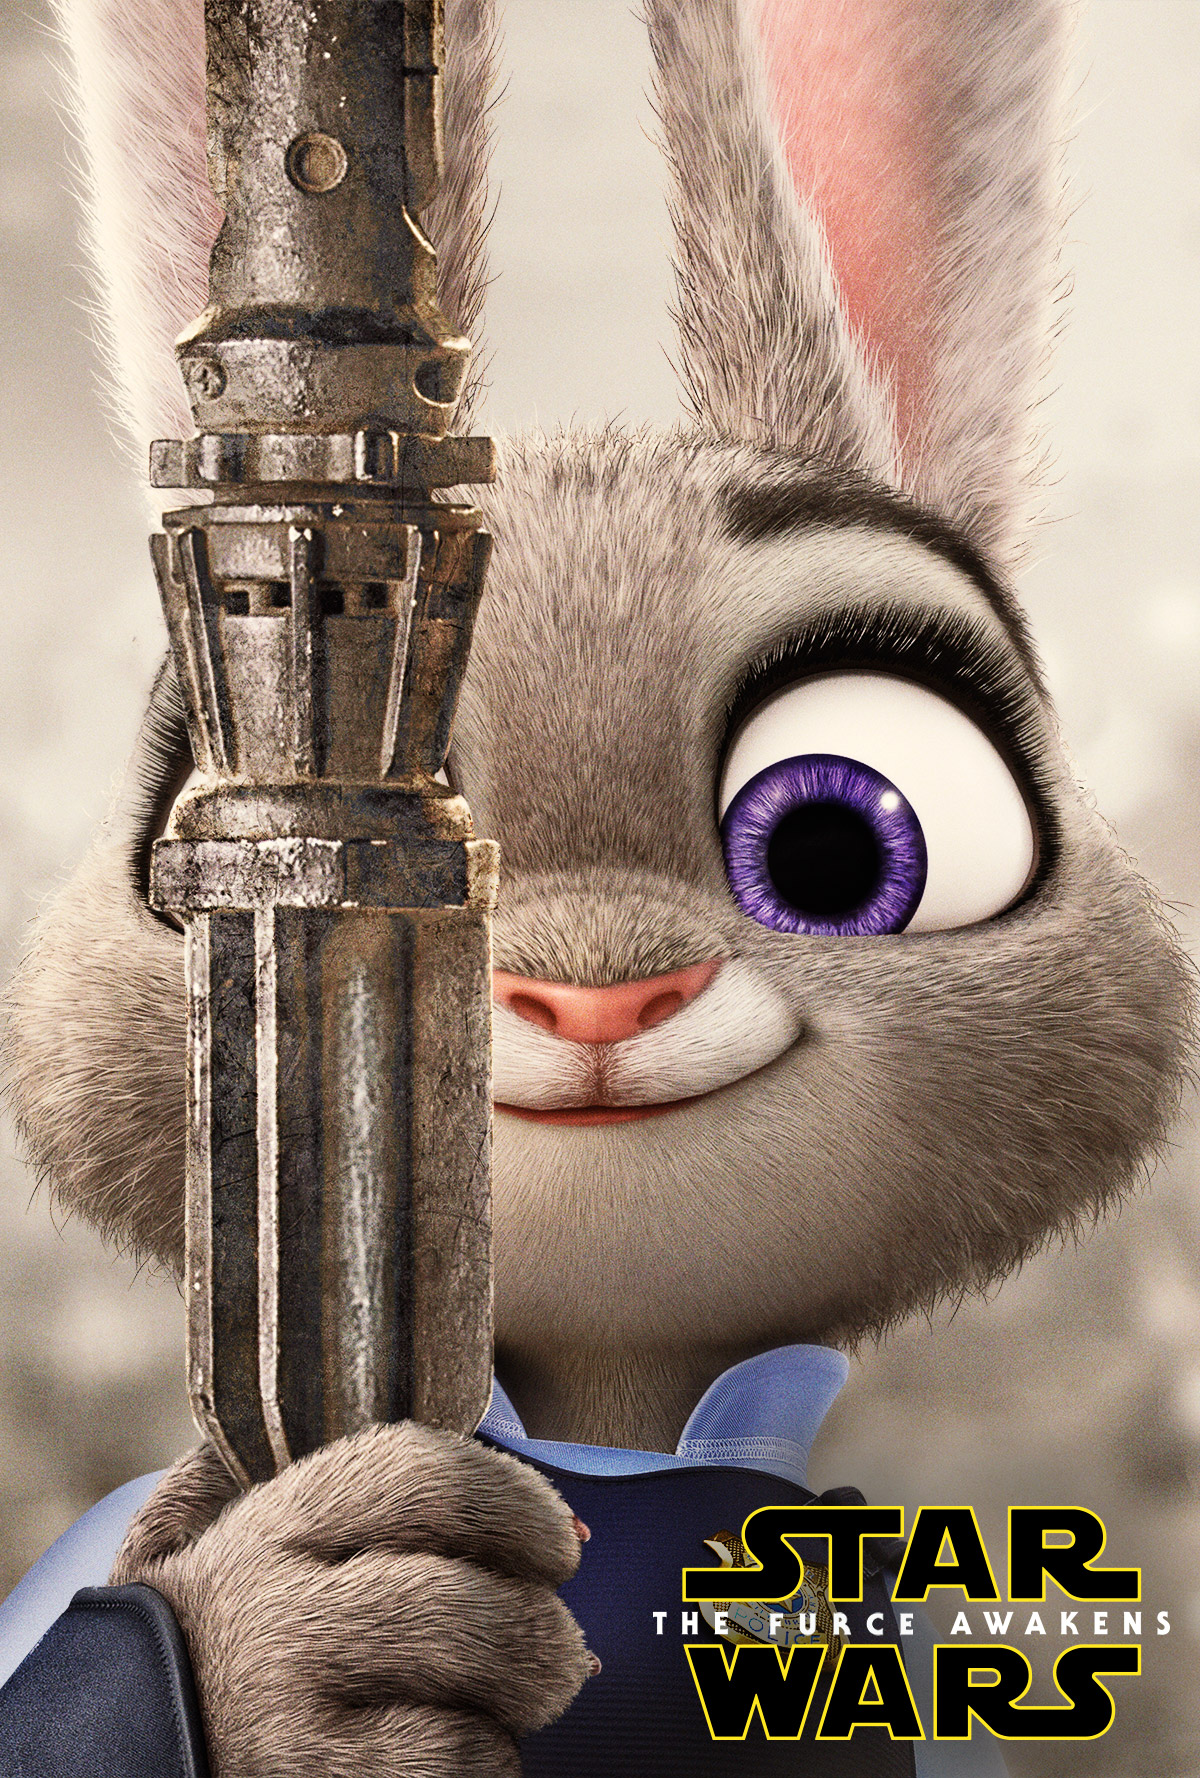 Just released: Zootopia Parody Posters and “Year in Film” Video